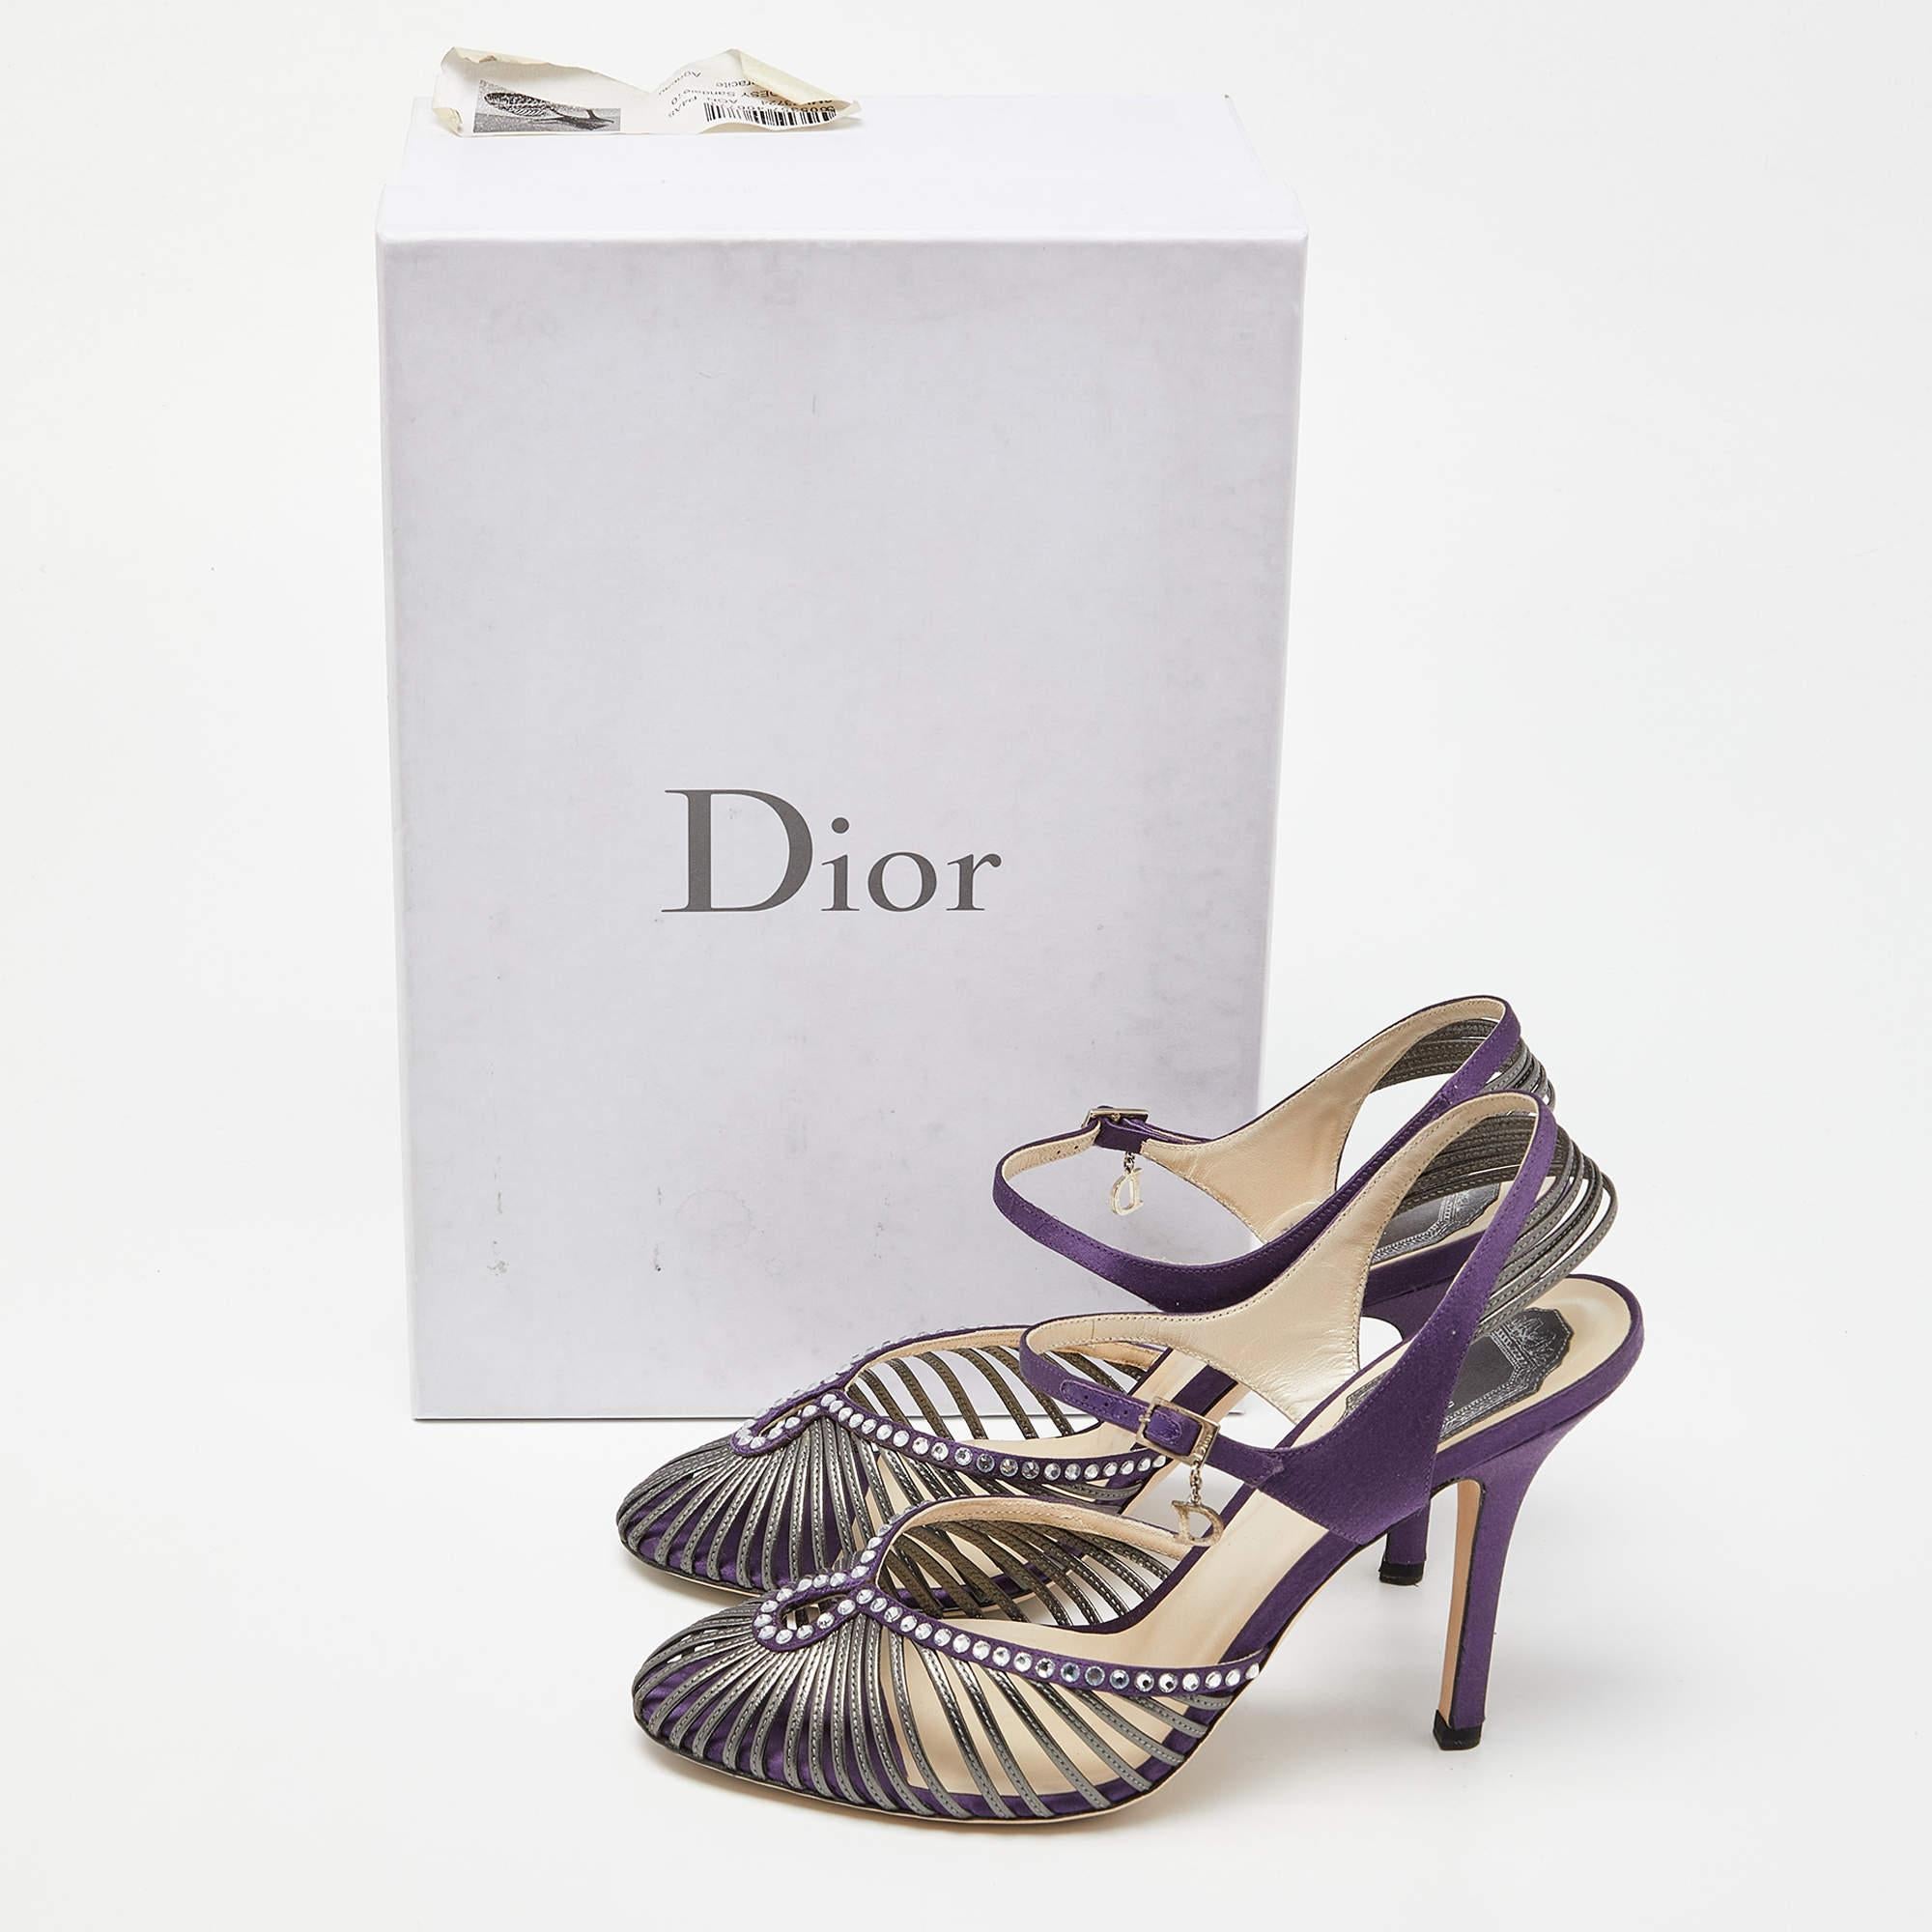 Dior Purple/Grey Satin and Leather Strappy Ankle Strap Sandals Size 38 5